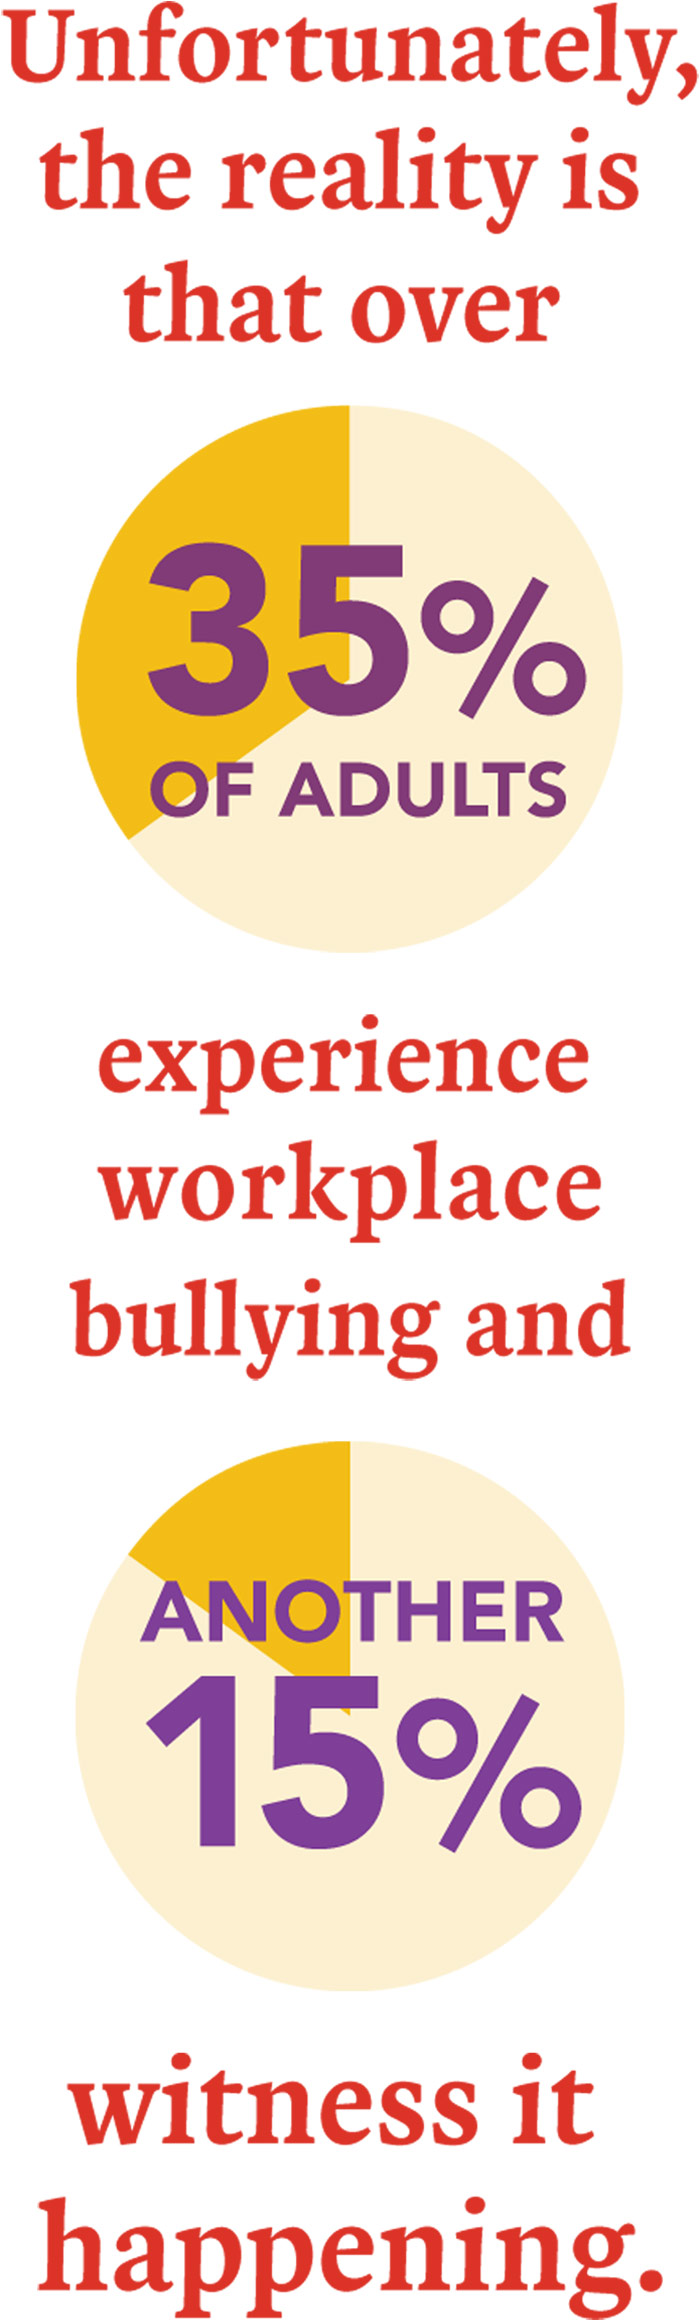 Unfortunately, the reality is that over 35 percent of adults experience workplace bullying and another 15 percent witness it happening.